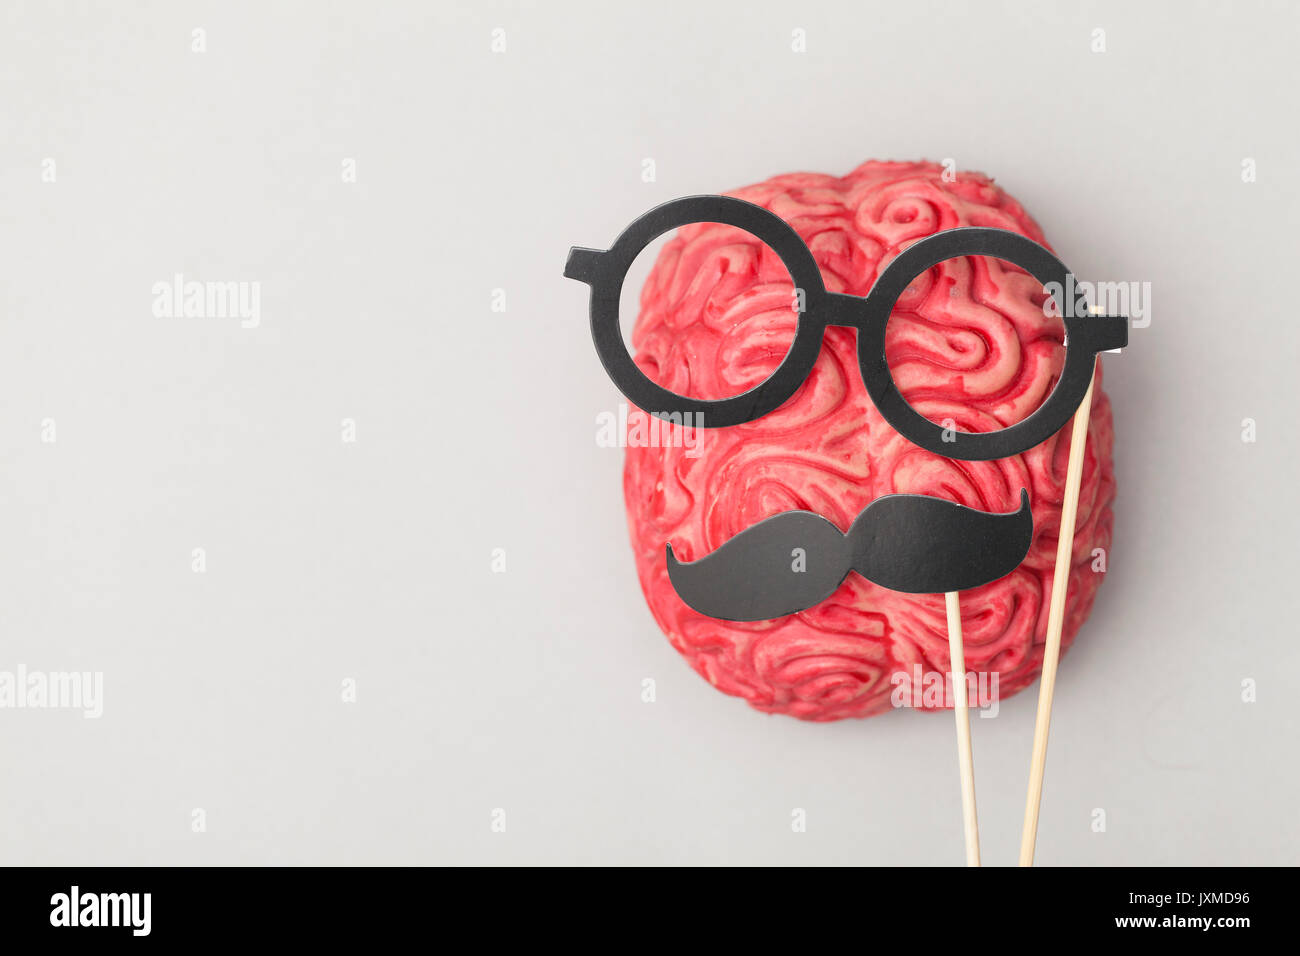 Human brain with comedy props Stock Photo